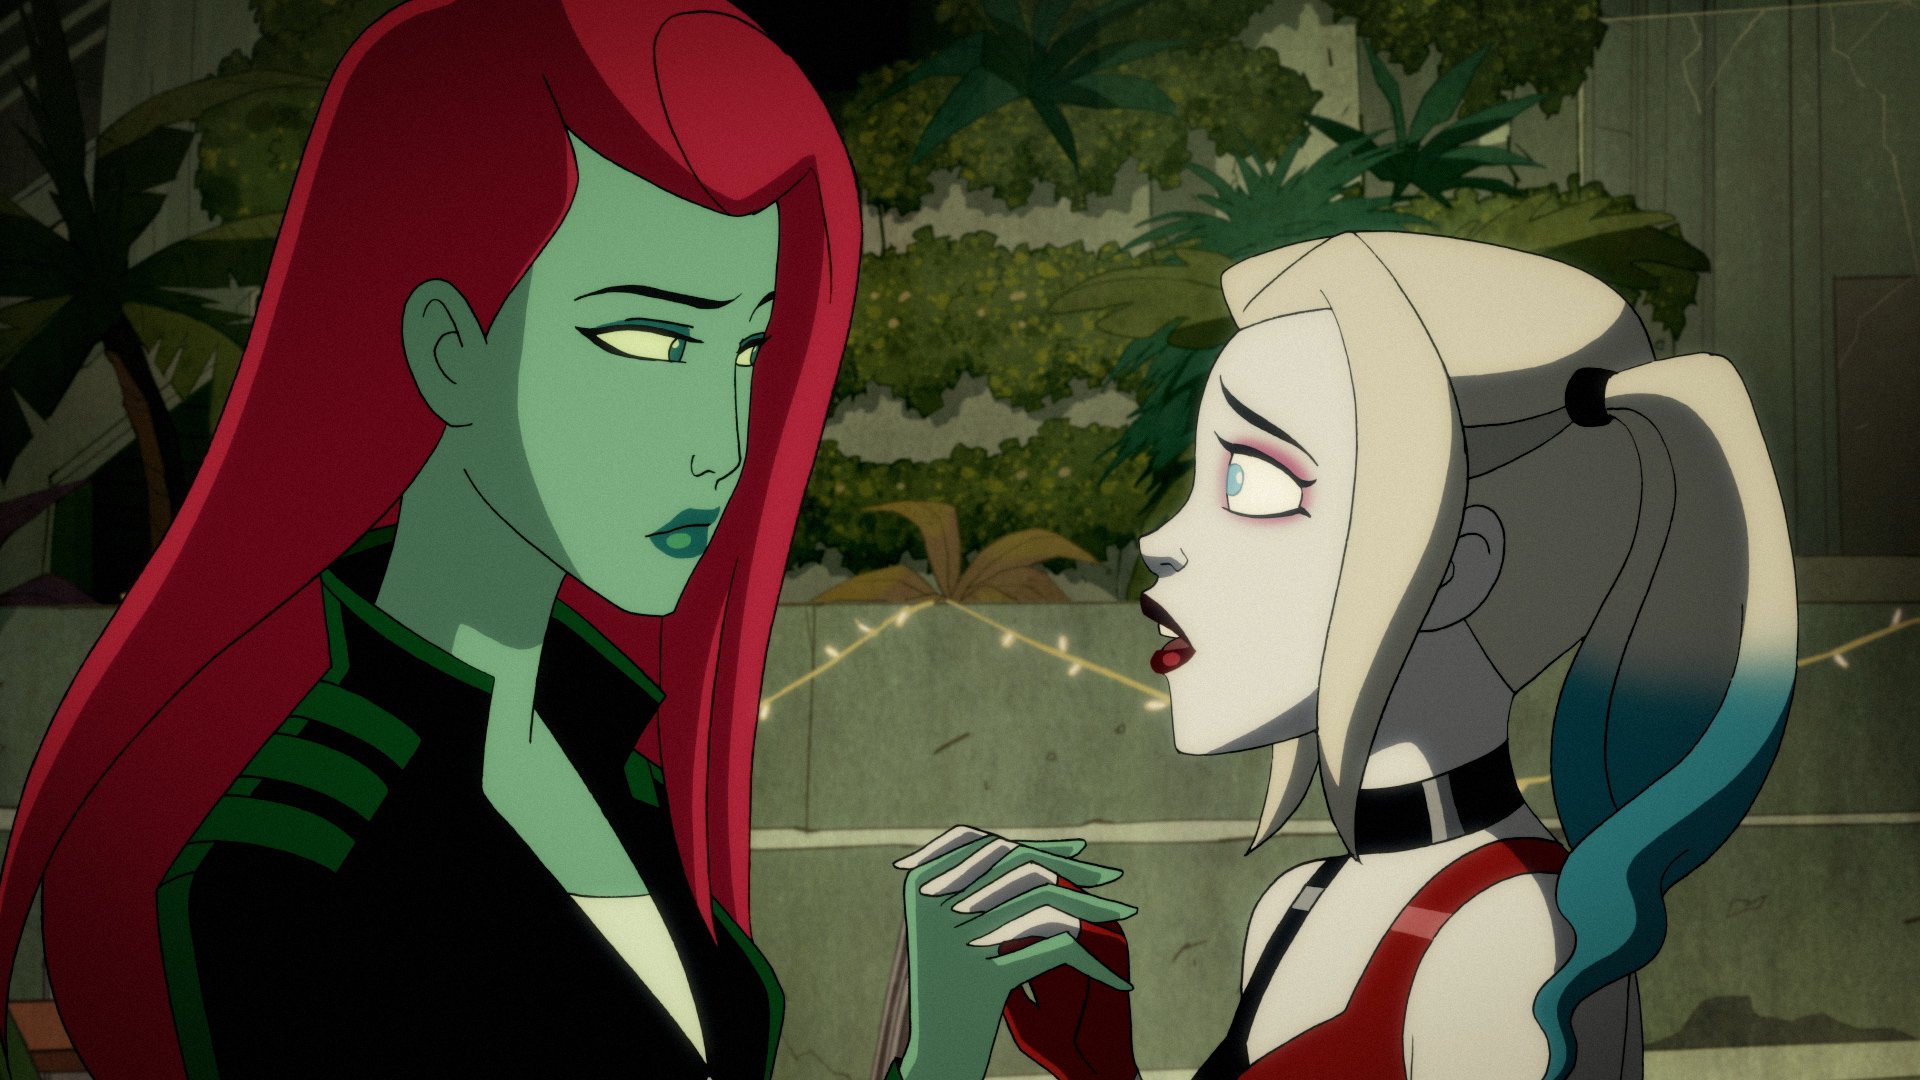 Poison Ivy and Harley Quinn in Season 2 of 'Harley Quinn'